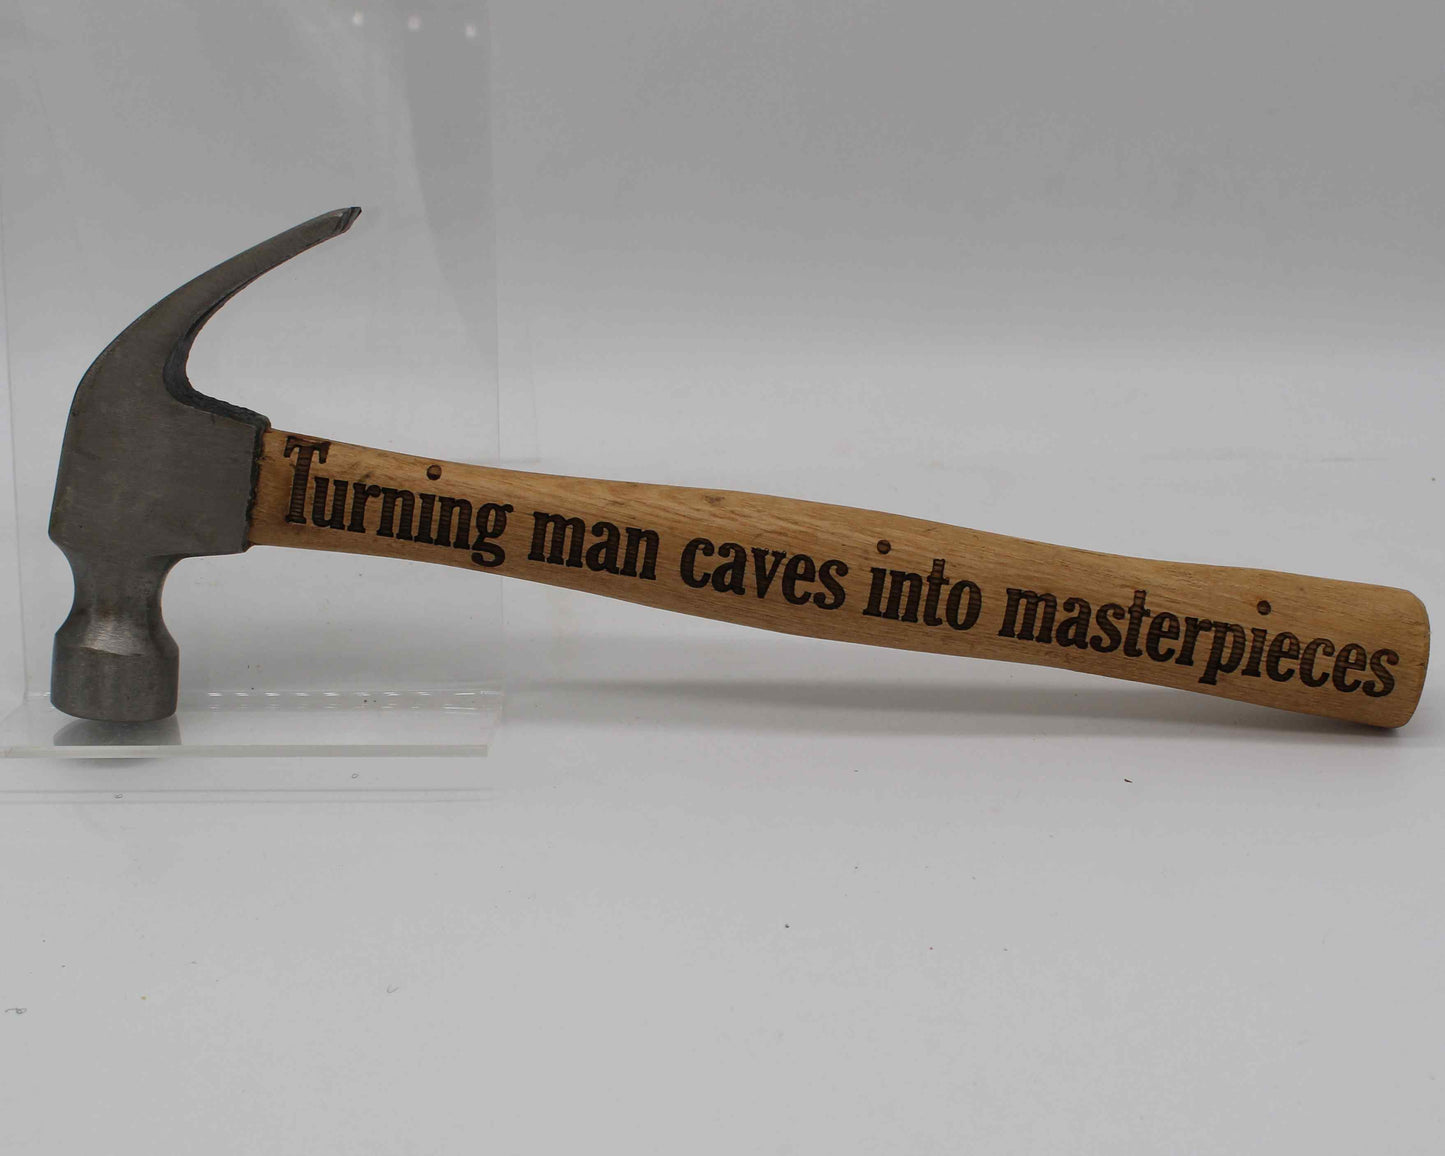 Engraved Hammers Assorted Designs Set 4 mixed